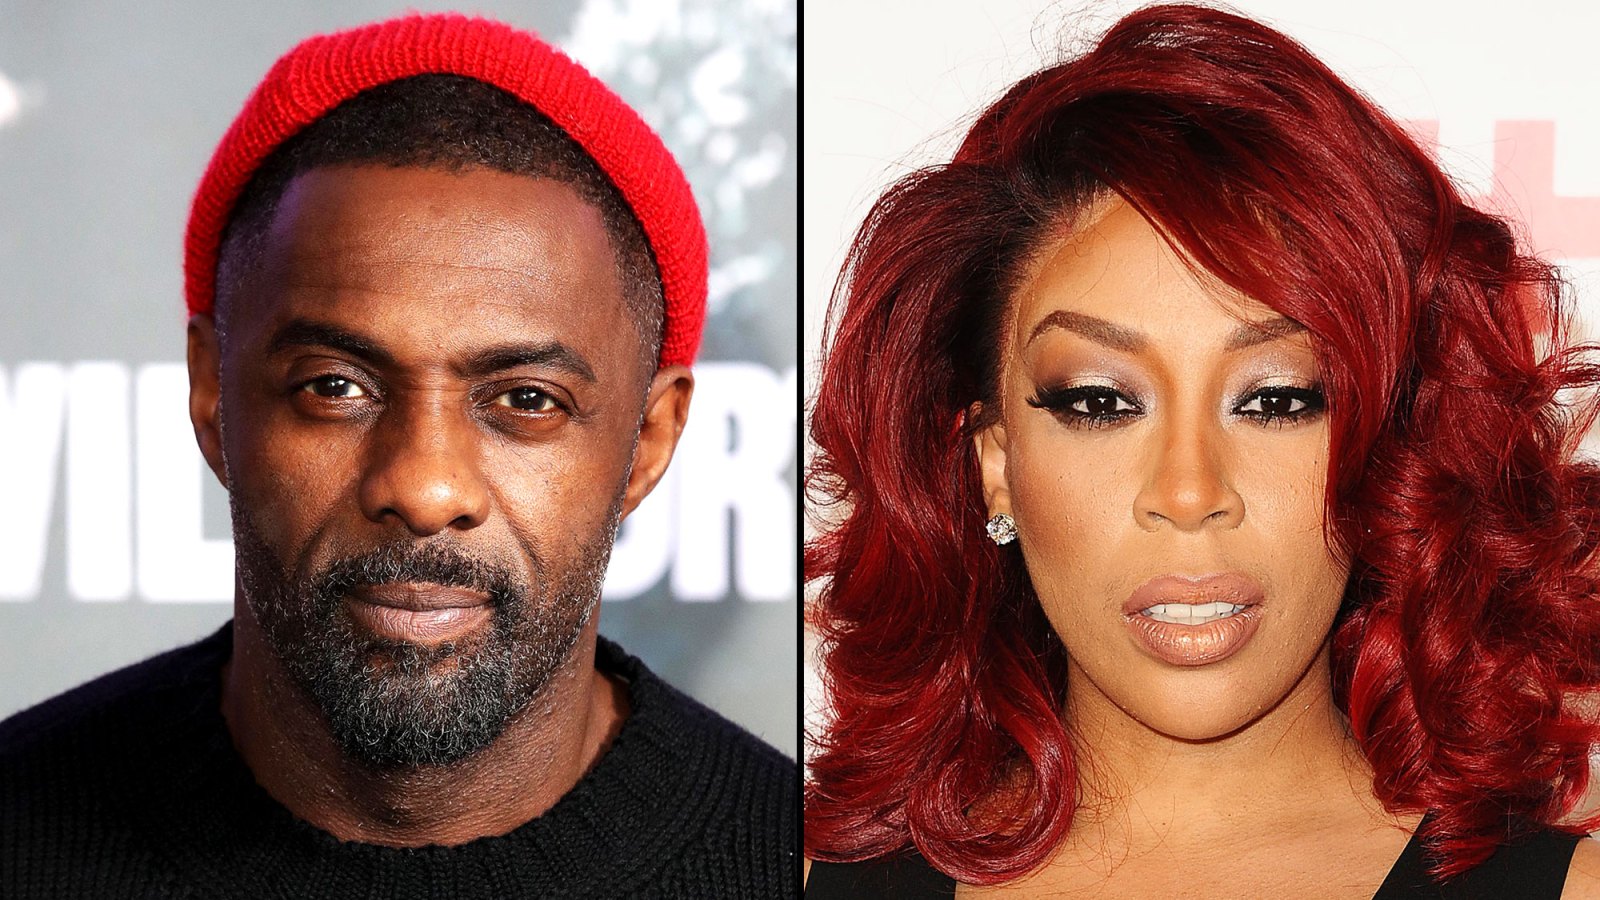 Idris Elba’s Ex-Girlfriend K. Michelle Raves About His Skills in the Bedroom: ‘He’s Very Passionate’